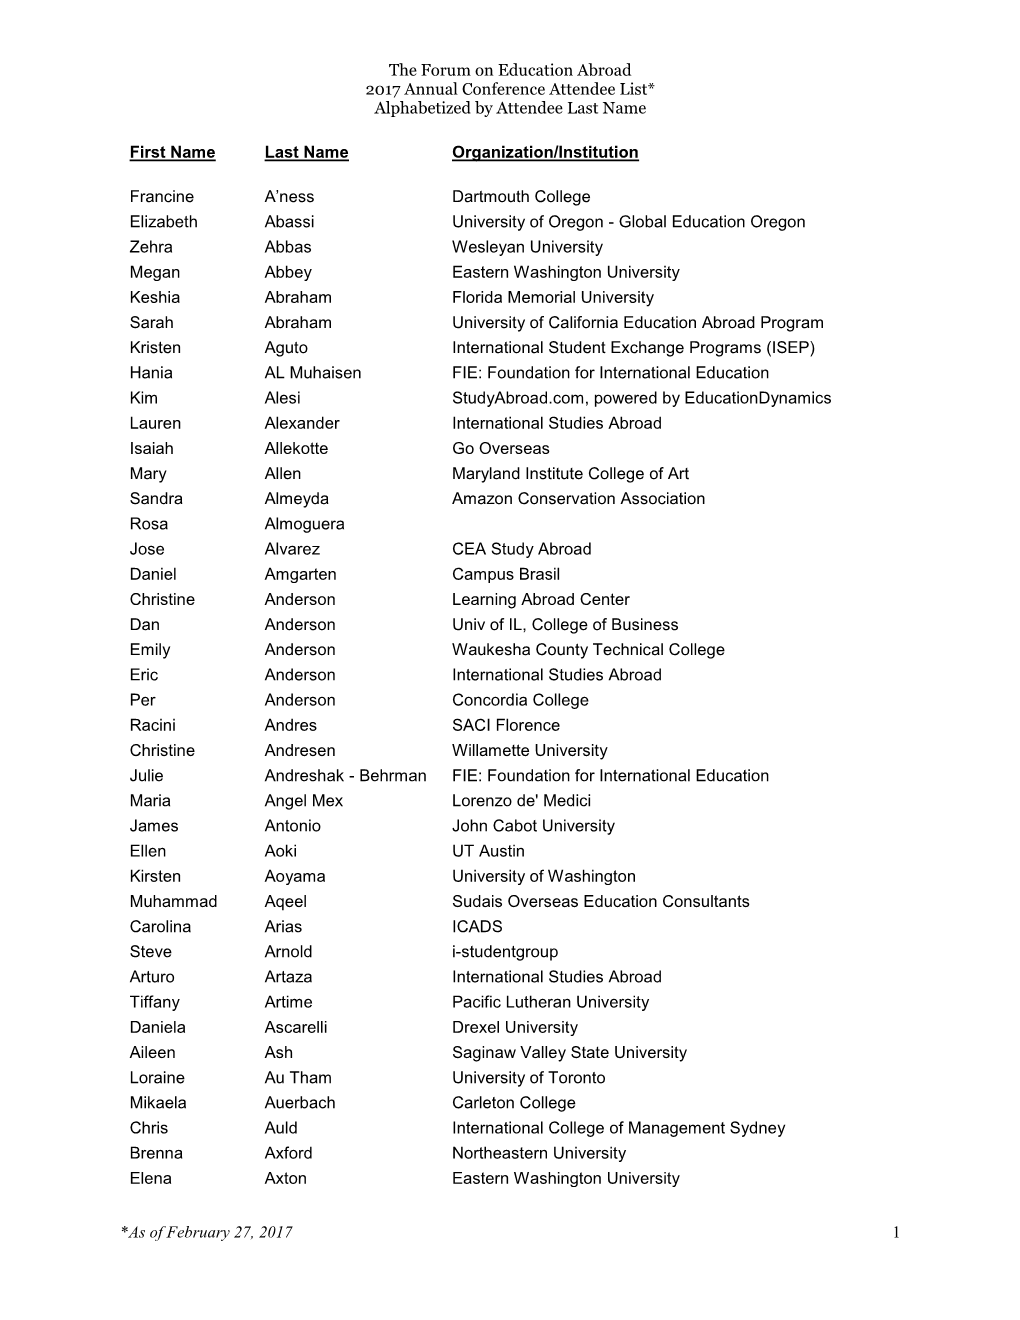 The Forum on Education Abroad 2017 Annual Conference Attendee List* Alphabetized by Attendee Last Name